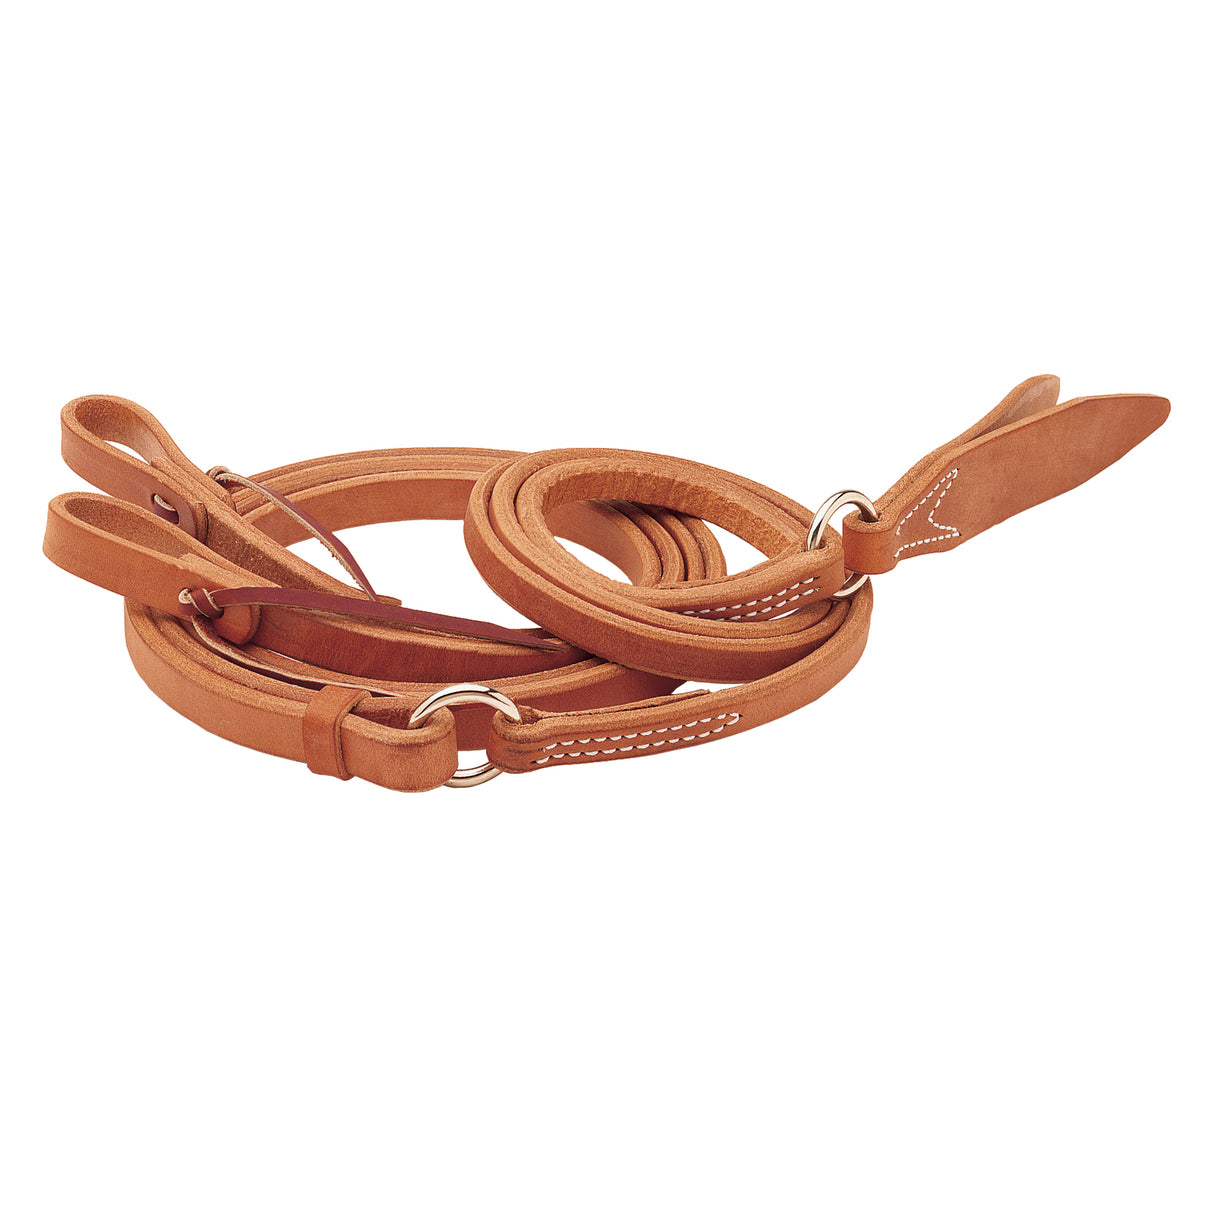 Harness Leather Romal Reins, 5/8" x 8